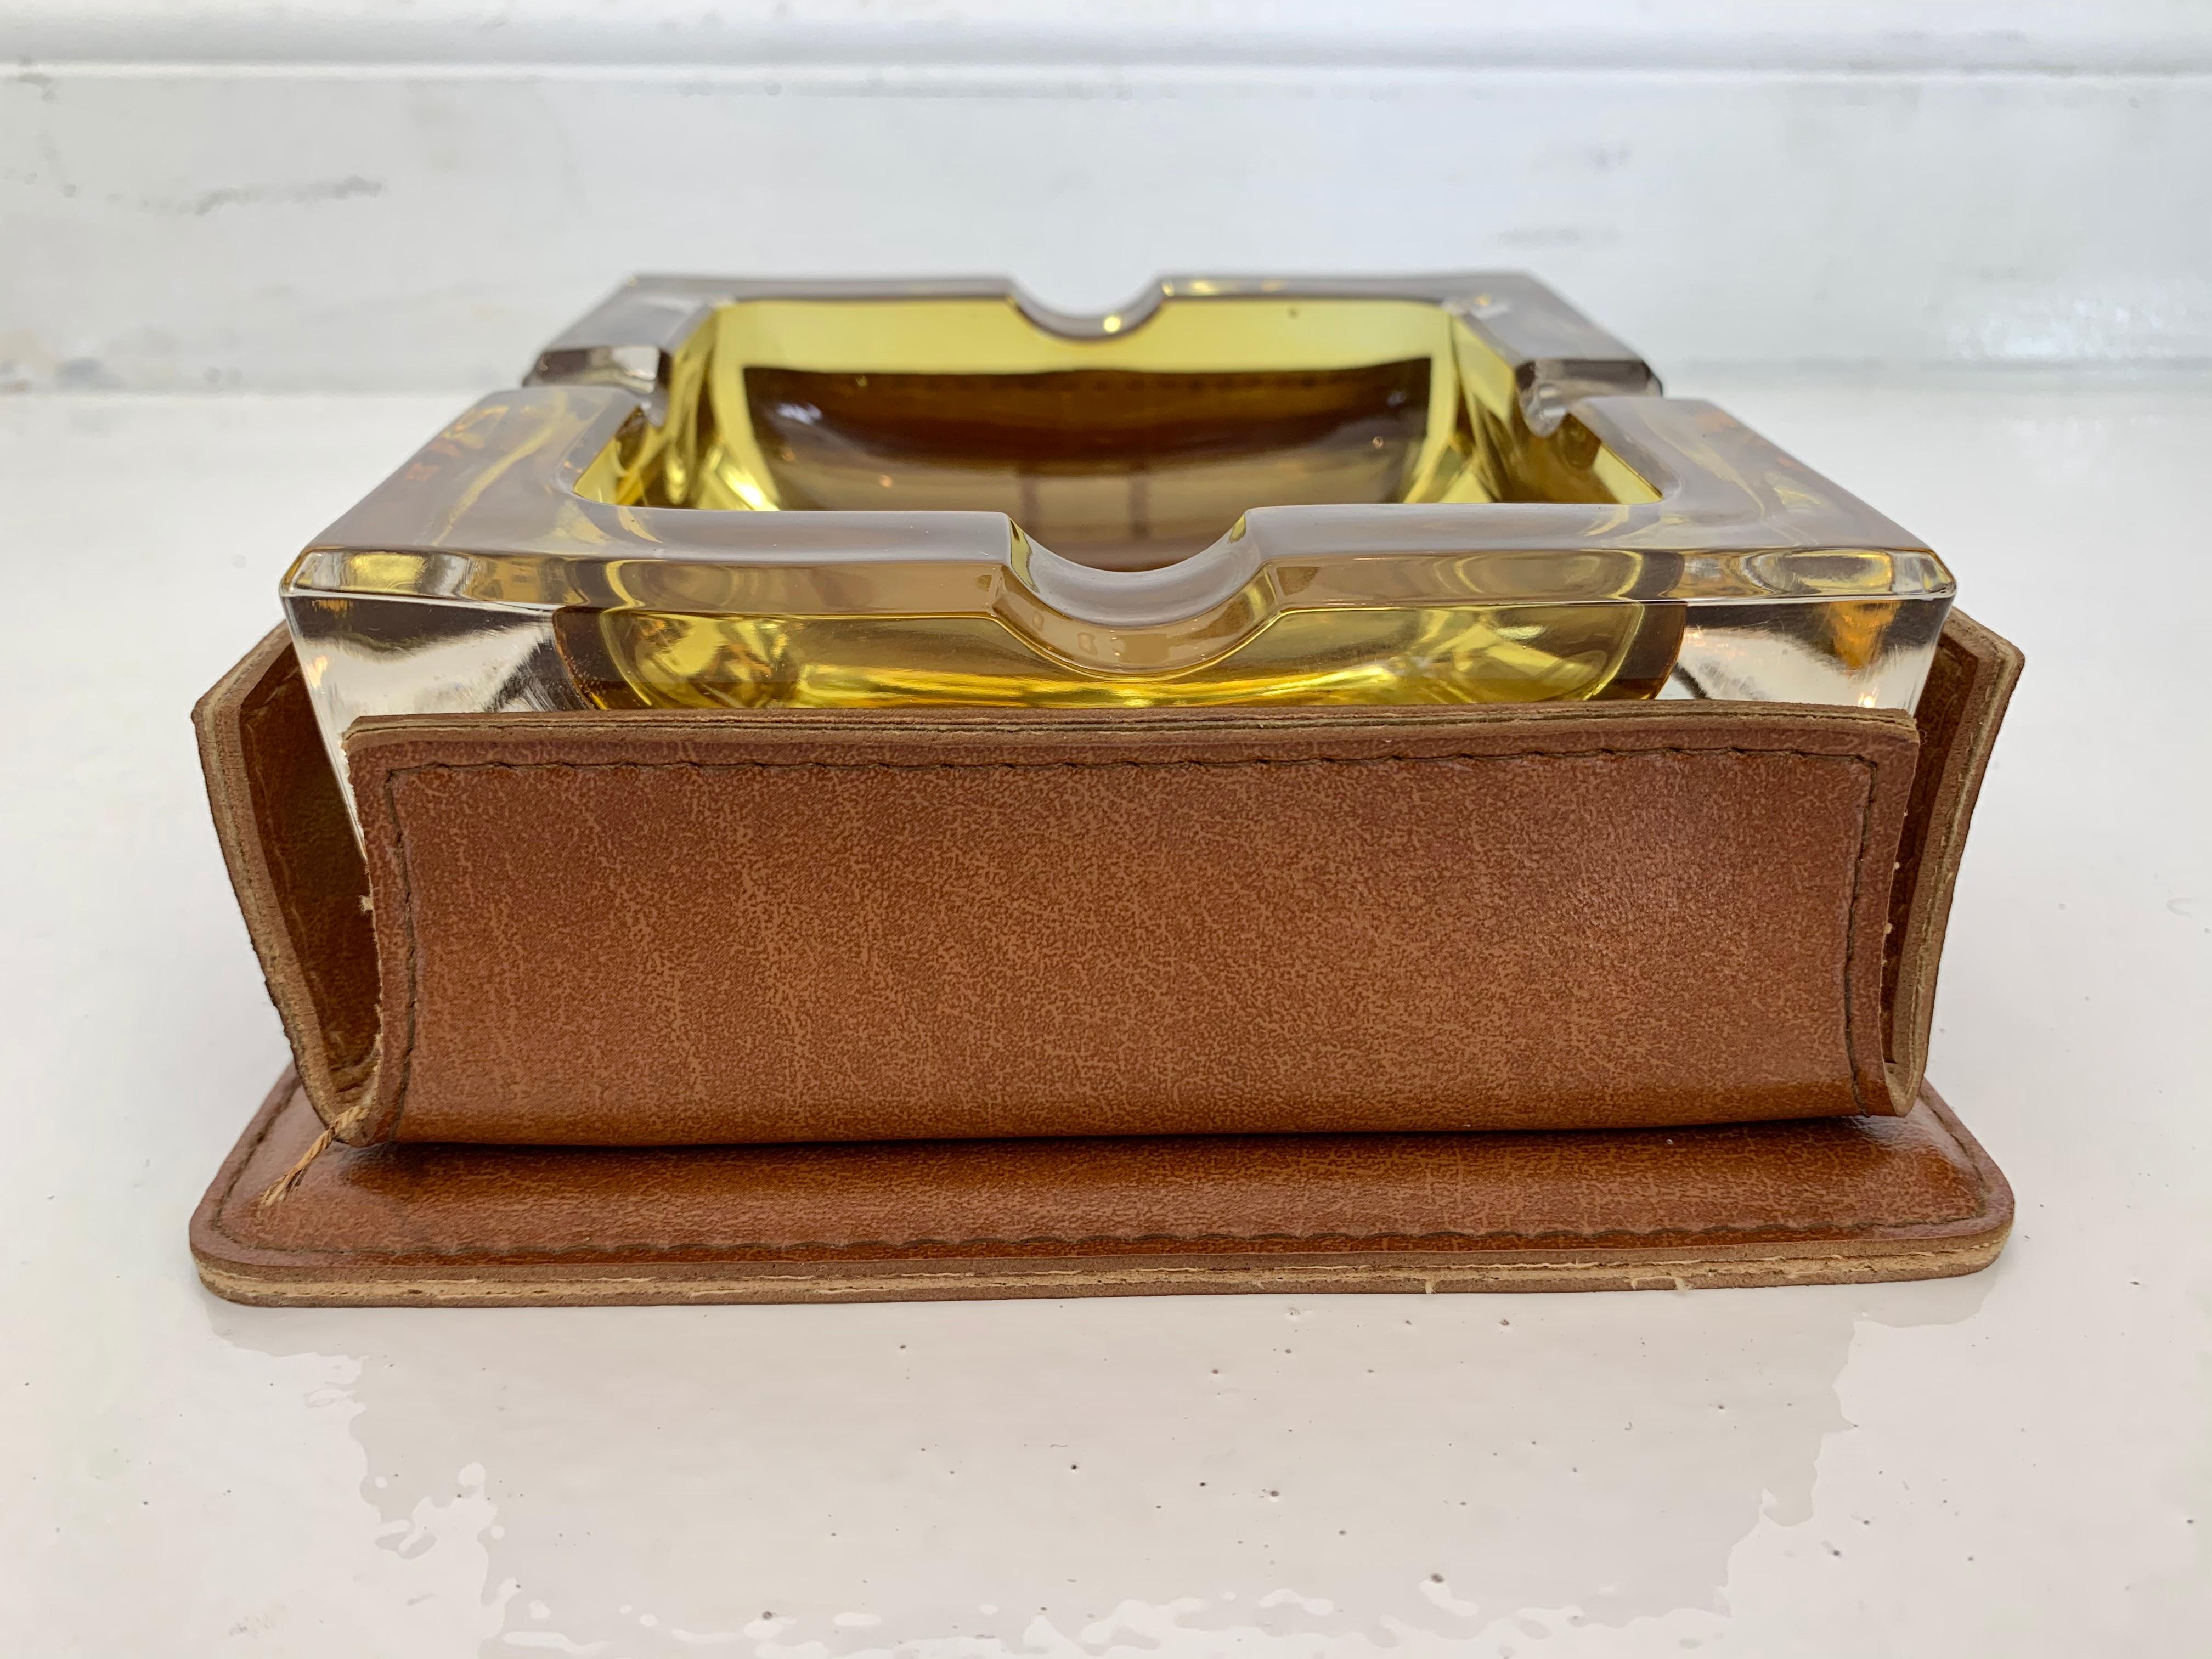 Handsome saddle leather and glass ashtray/ catchall in the style of Jacques Adnet. Square saddle leather holder with contrast stitching. Amber glass dish can be removed for cleaning. Good condition. Great desktop object.